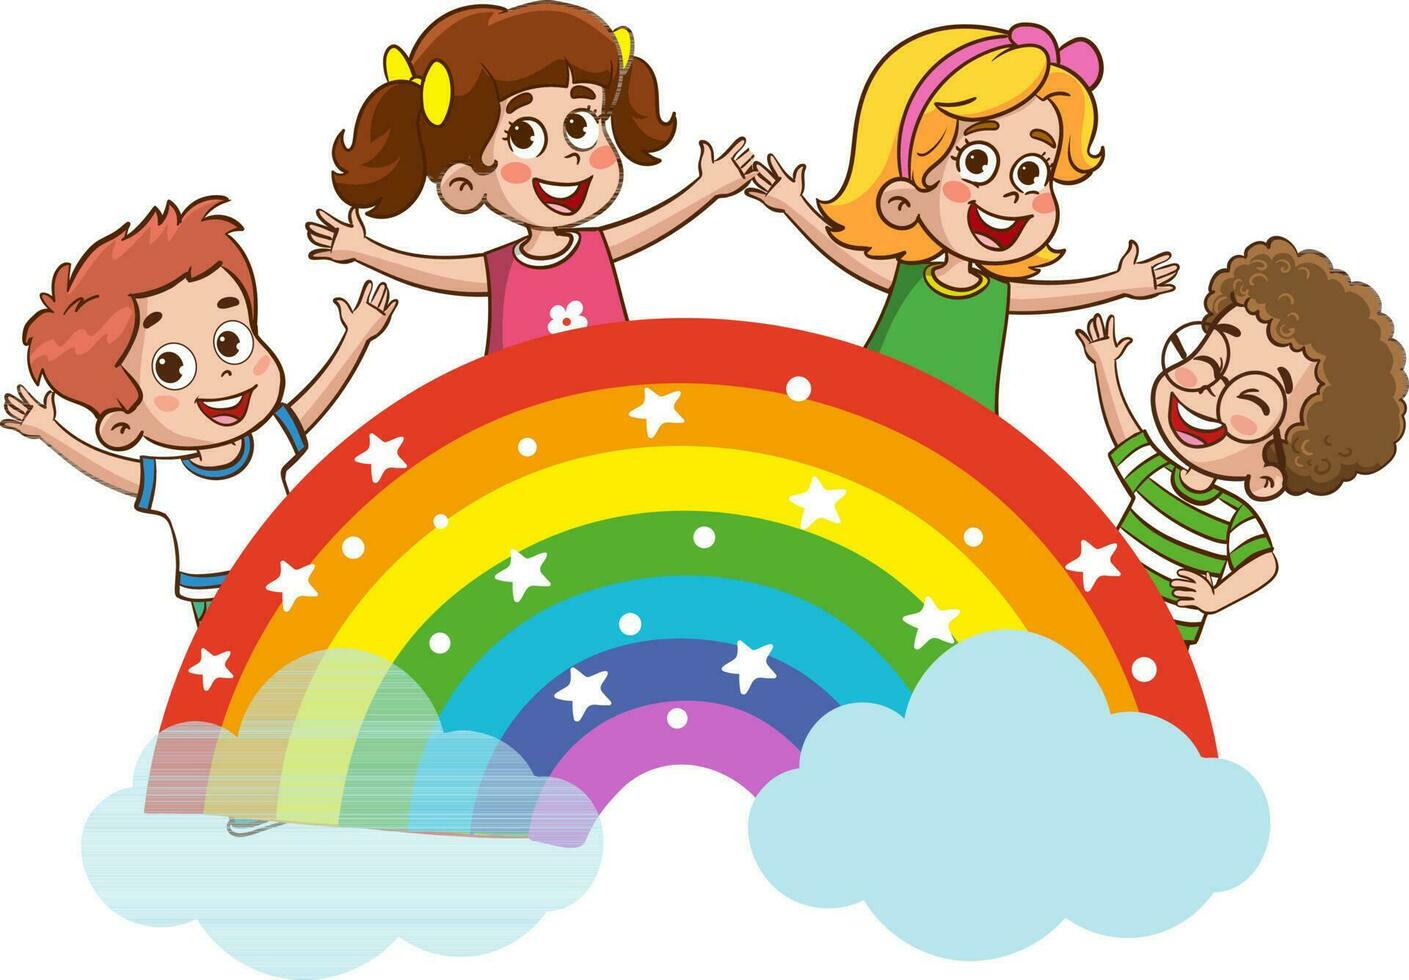 Children and rainbow. Vector illustration. Isolated on white background